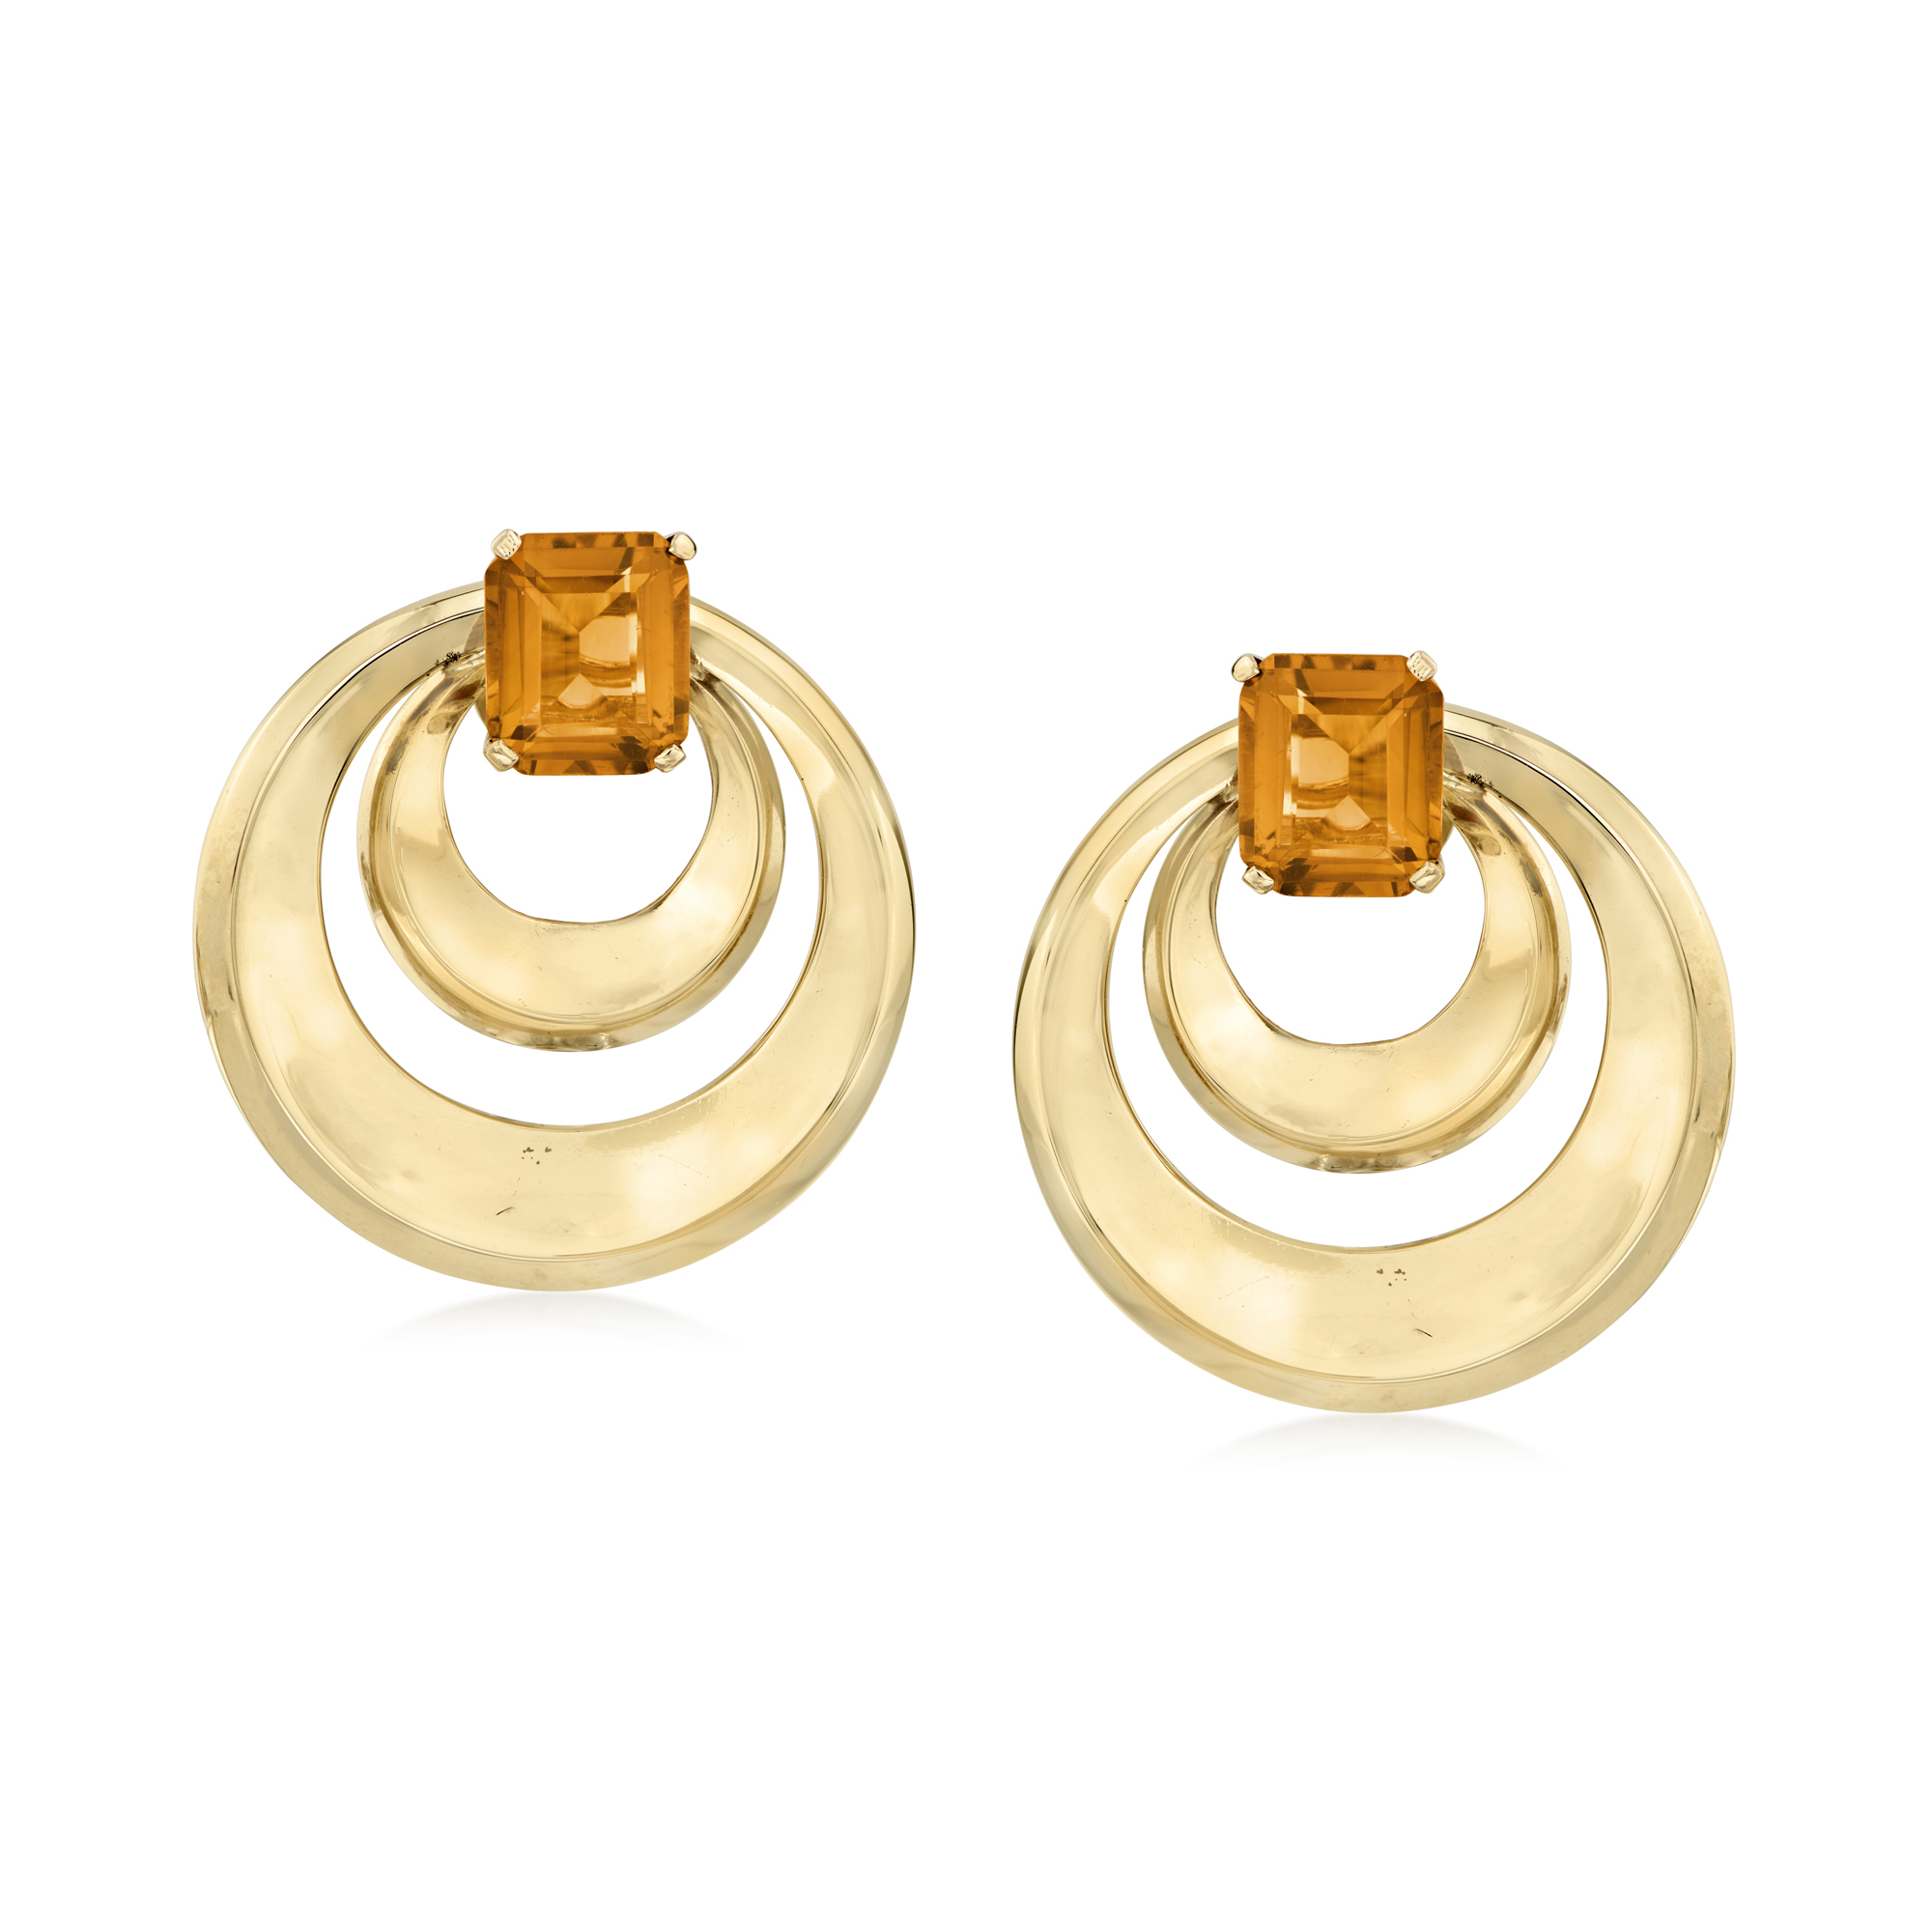 C. 1970 Vintage 10.00 ct. t.w. Citrine Circle Clip-On Earrings in 14kt  Yellow Gold | Ross-Simons